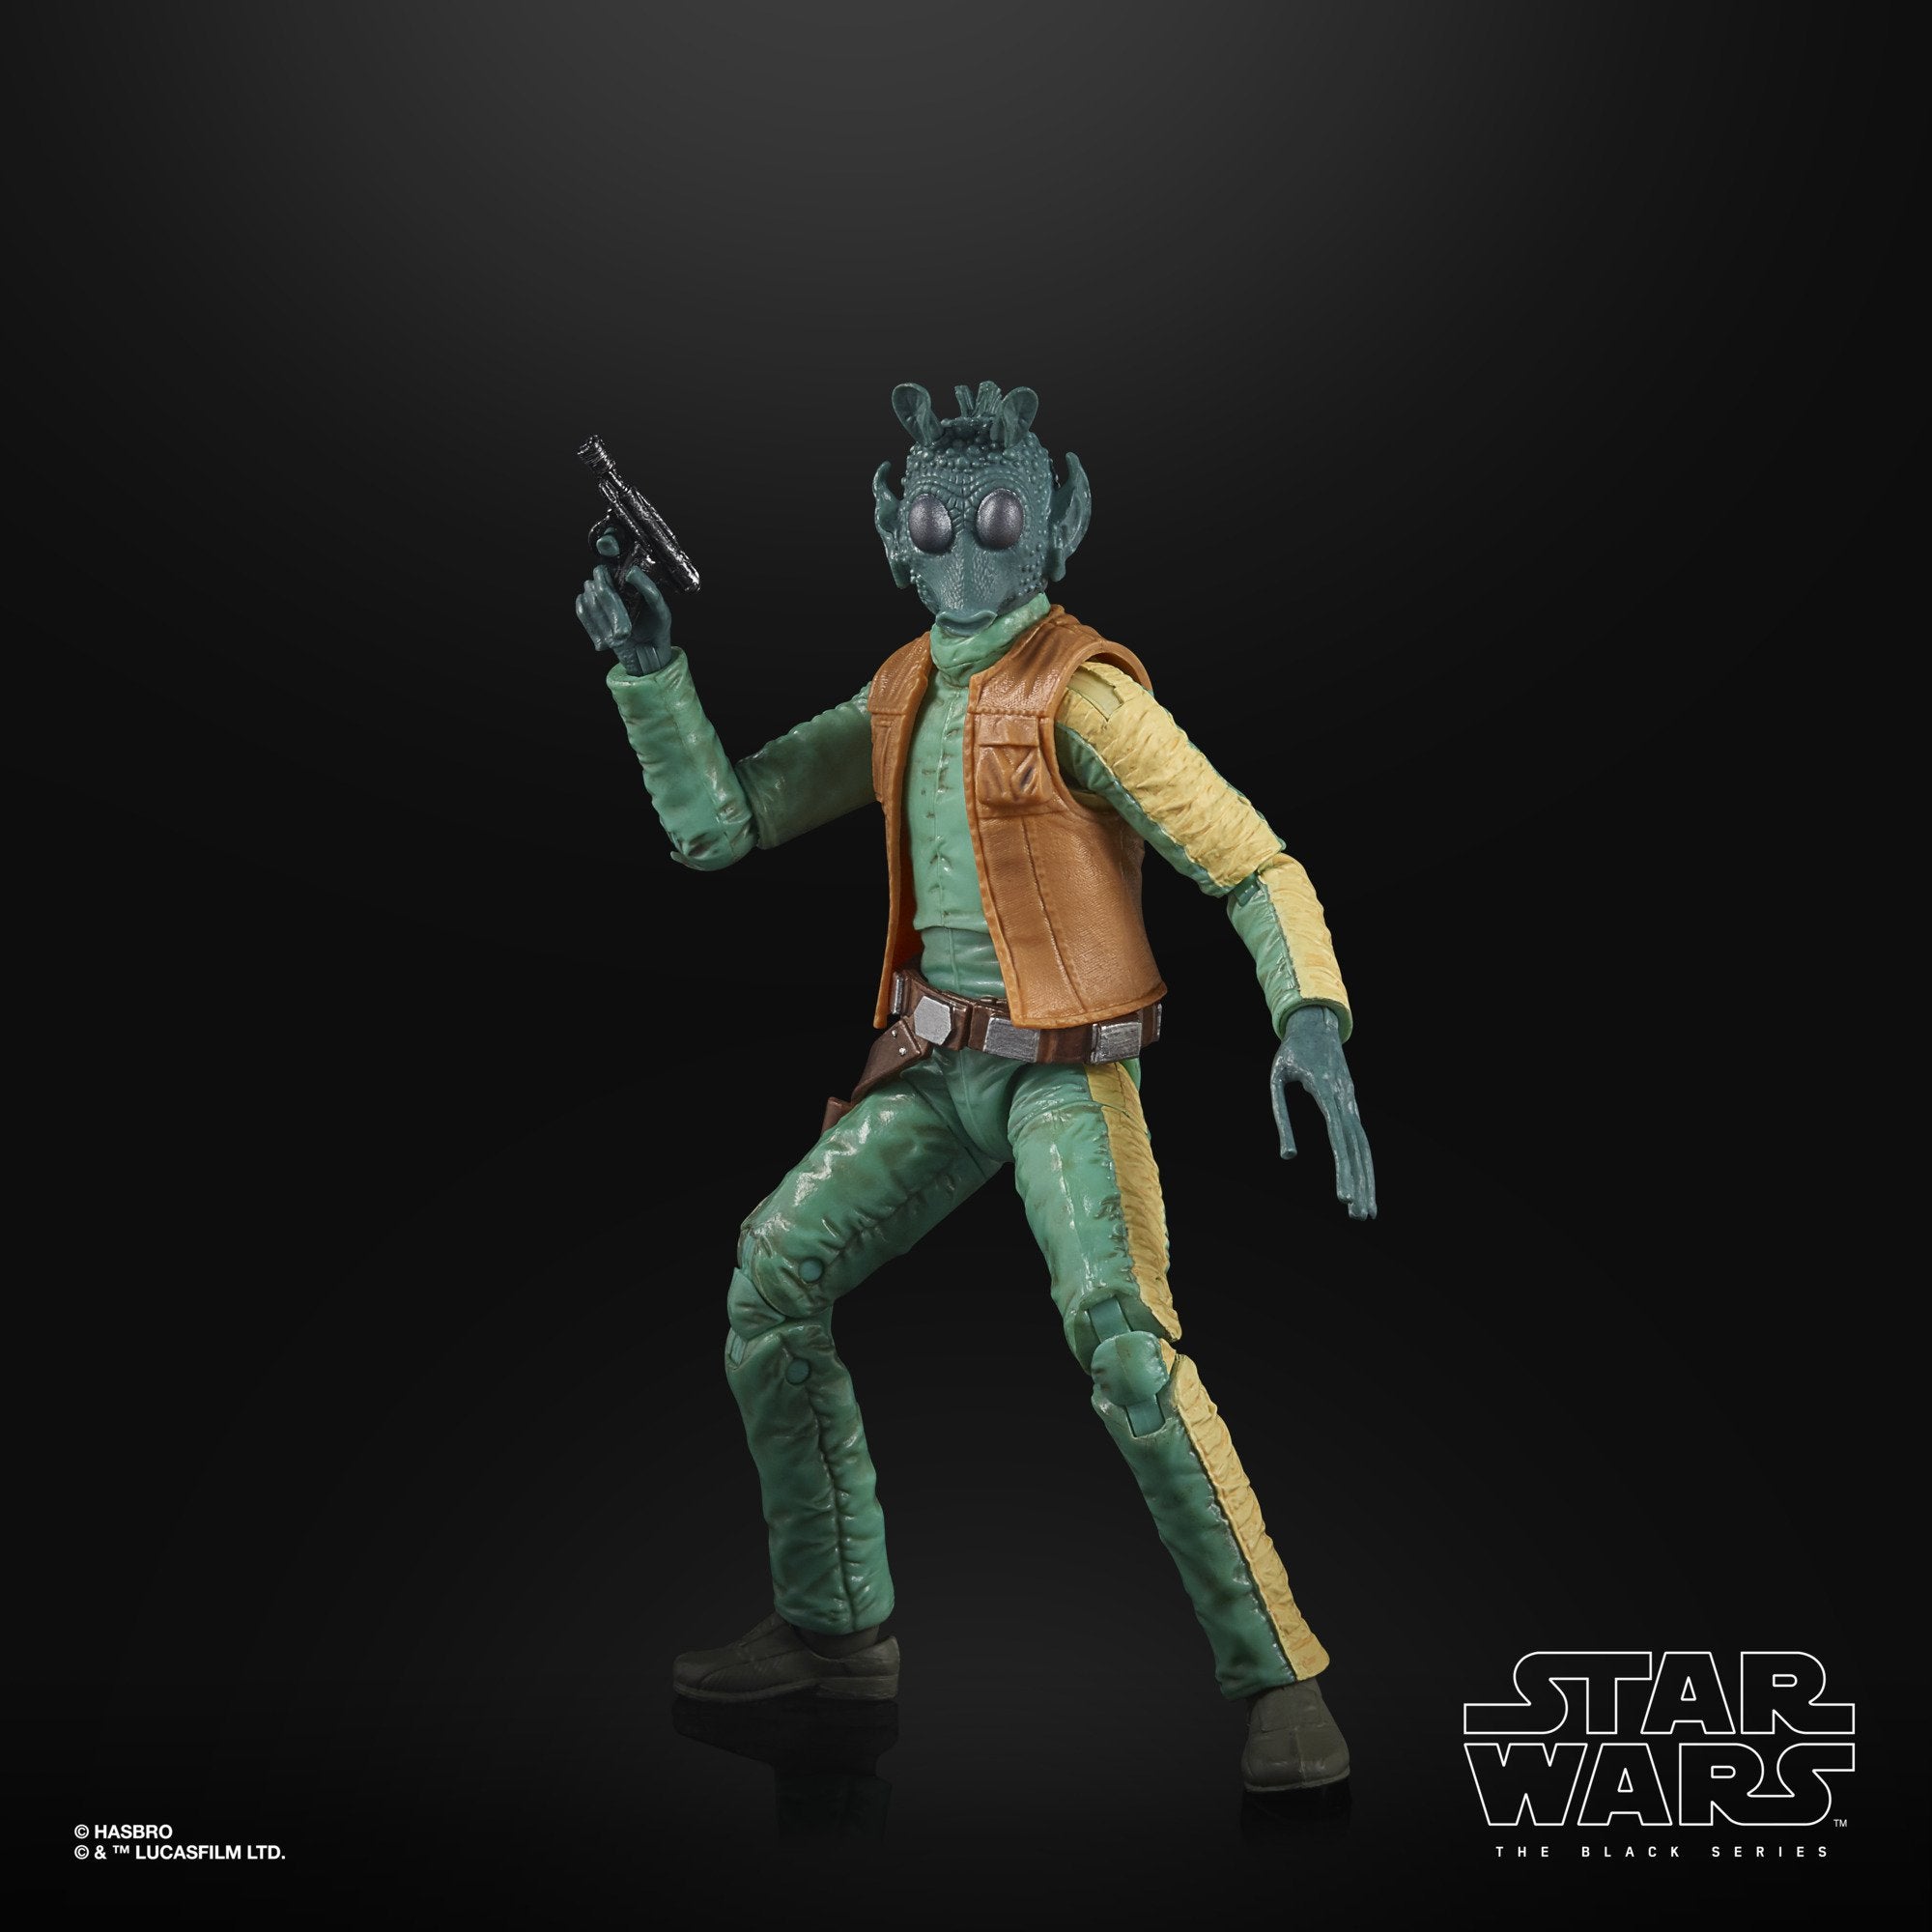 Hasbro Star Wars The Black Series Lucasfilm 50th Anniversary The Power of the Force Greedo 6 Inch Action Figure